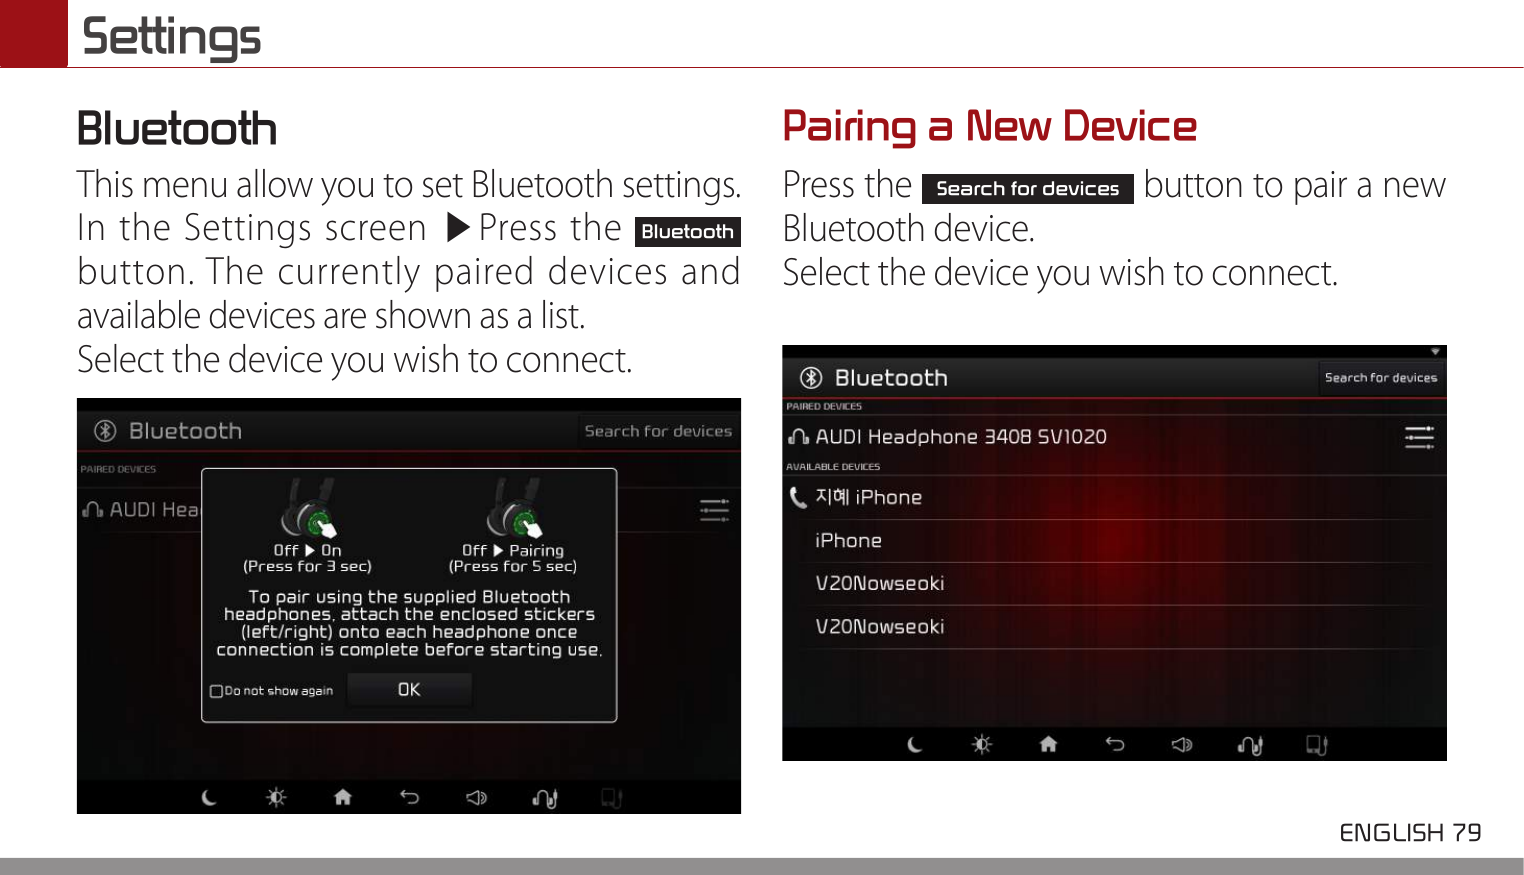  ENGLISH 79 SettingsBluetoothThis menu allow you to set Bluetooth settings.In the Settings screen ▶Press the Bluetooth button. The currently paired devices and available devices are shown as a list.Select the device you wish to connect.Pairing a New DevicePress the Search for devices button to pair a new Bluetooth device.Select the device you wish to connect.